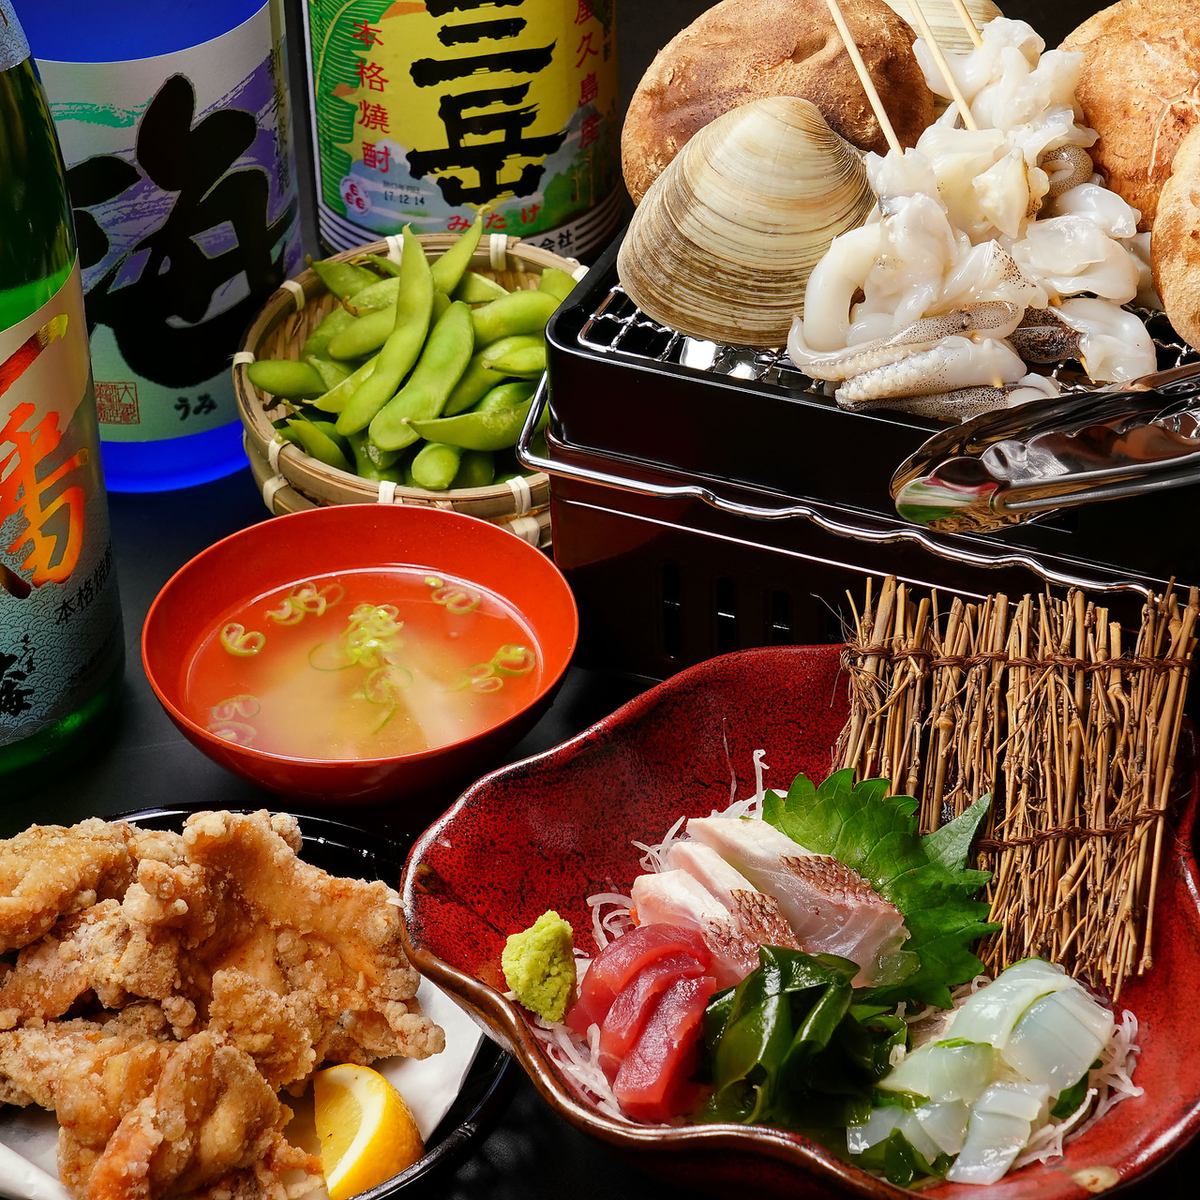 The value course with fresh sashimi and hamayaki starts at 3,000 yen and includes an all-you-can-drink!